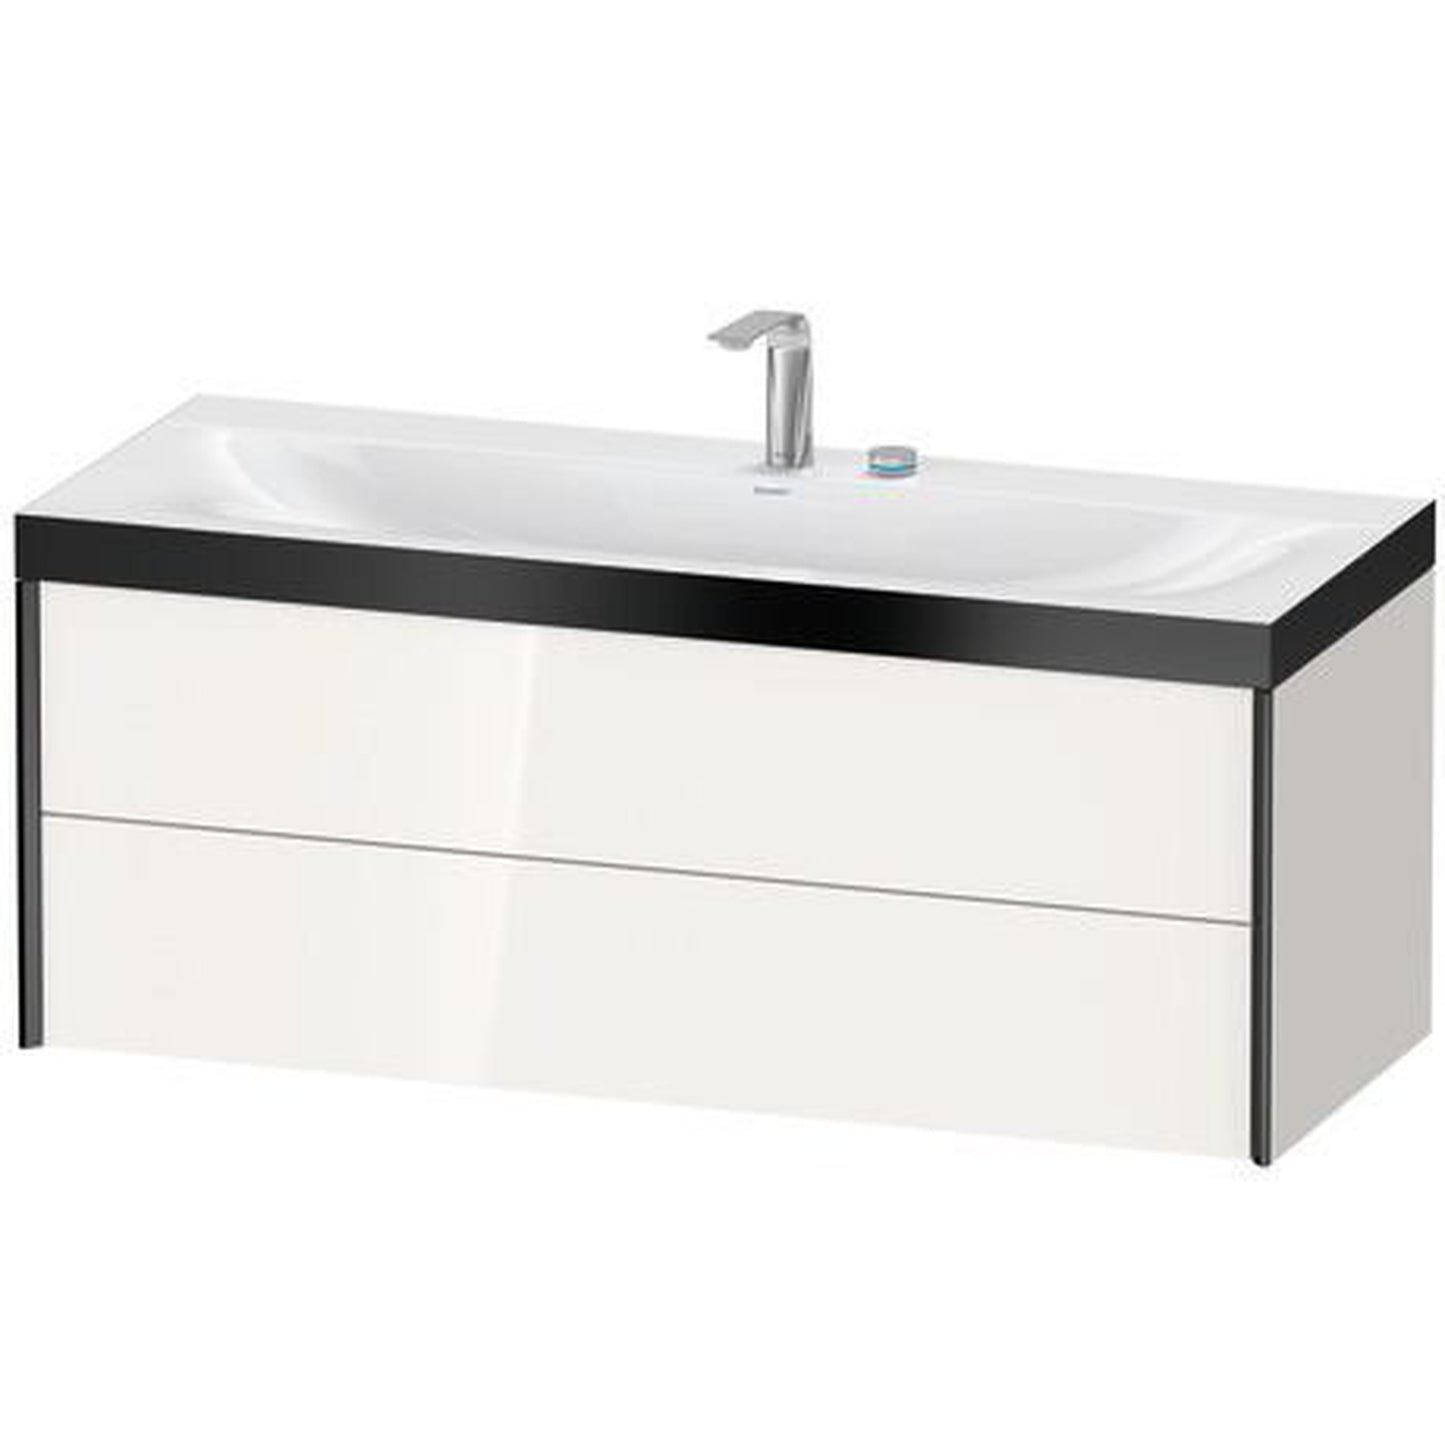 Duravit Xviu 47" x 20" x 19" Two Drawer C-Bonded Wall-Mount Vanity Kit With Two Tap Holes, White (XV4617EB222P)